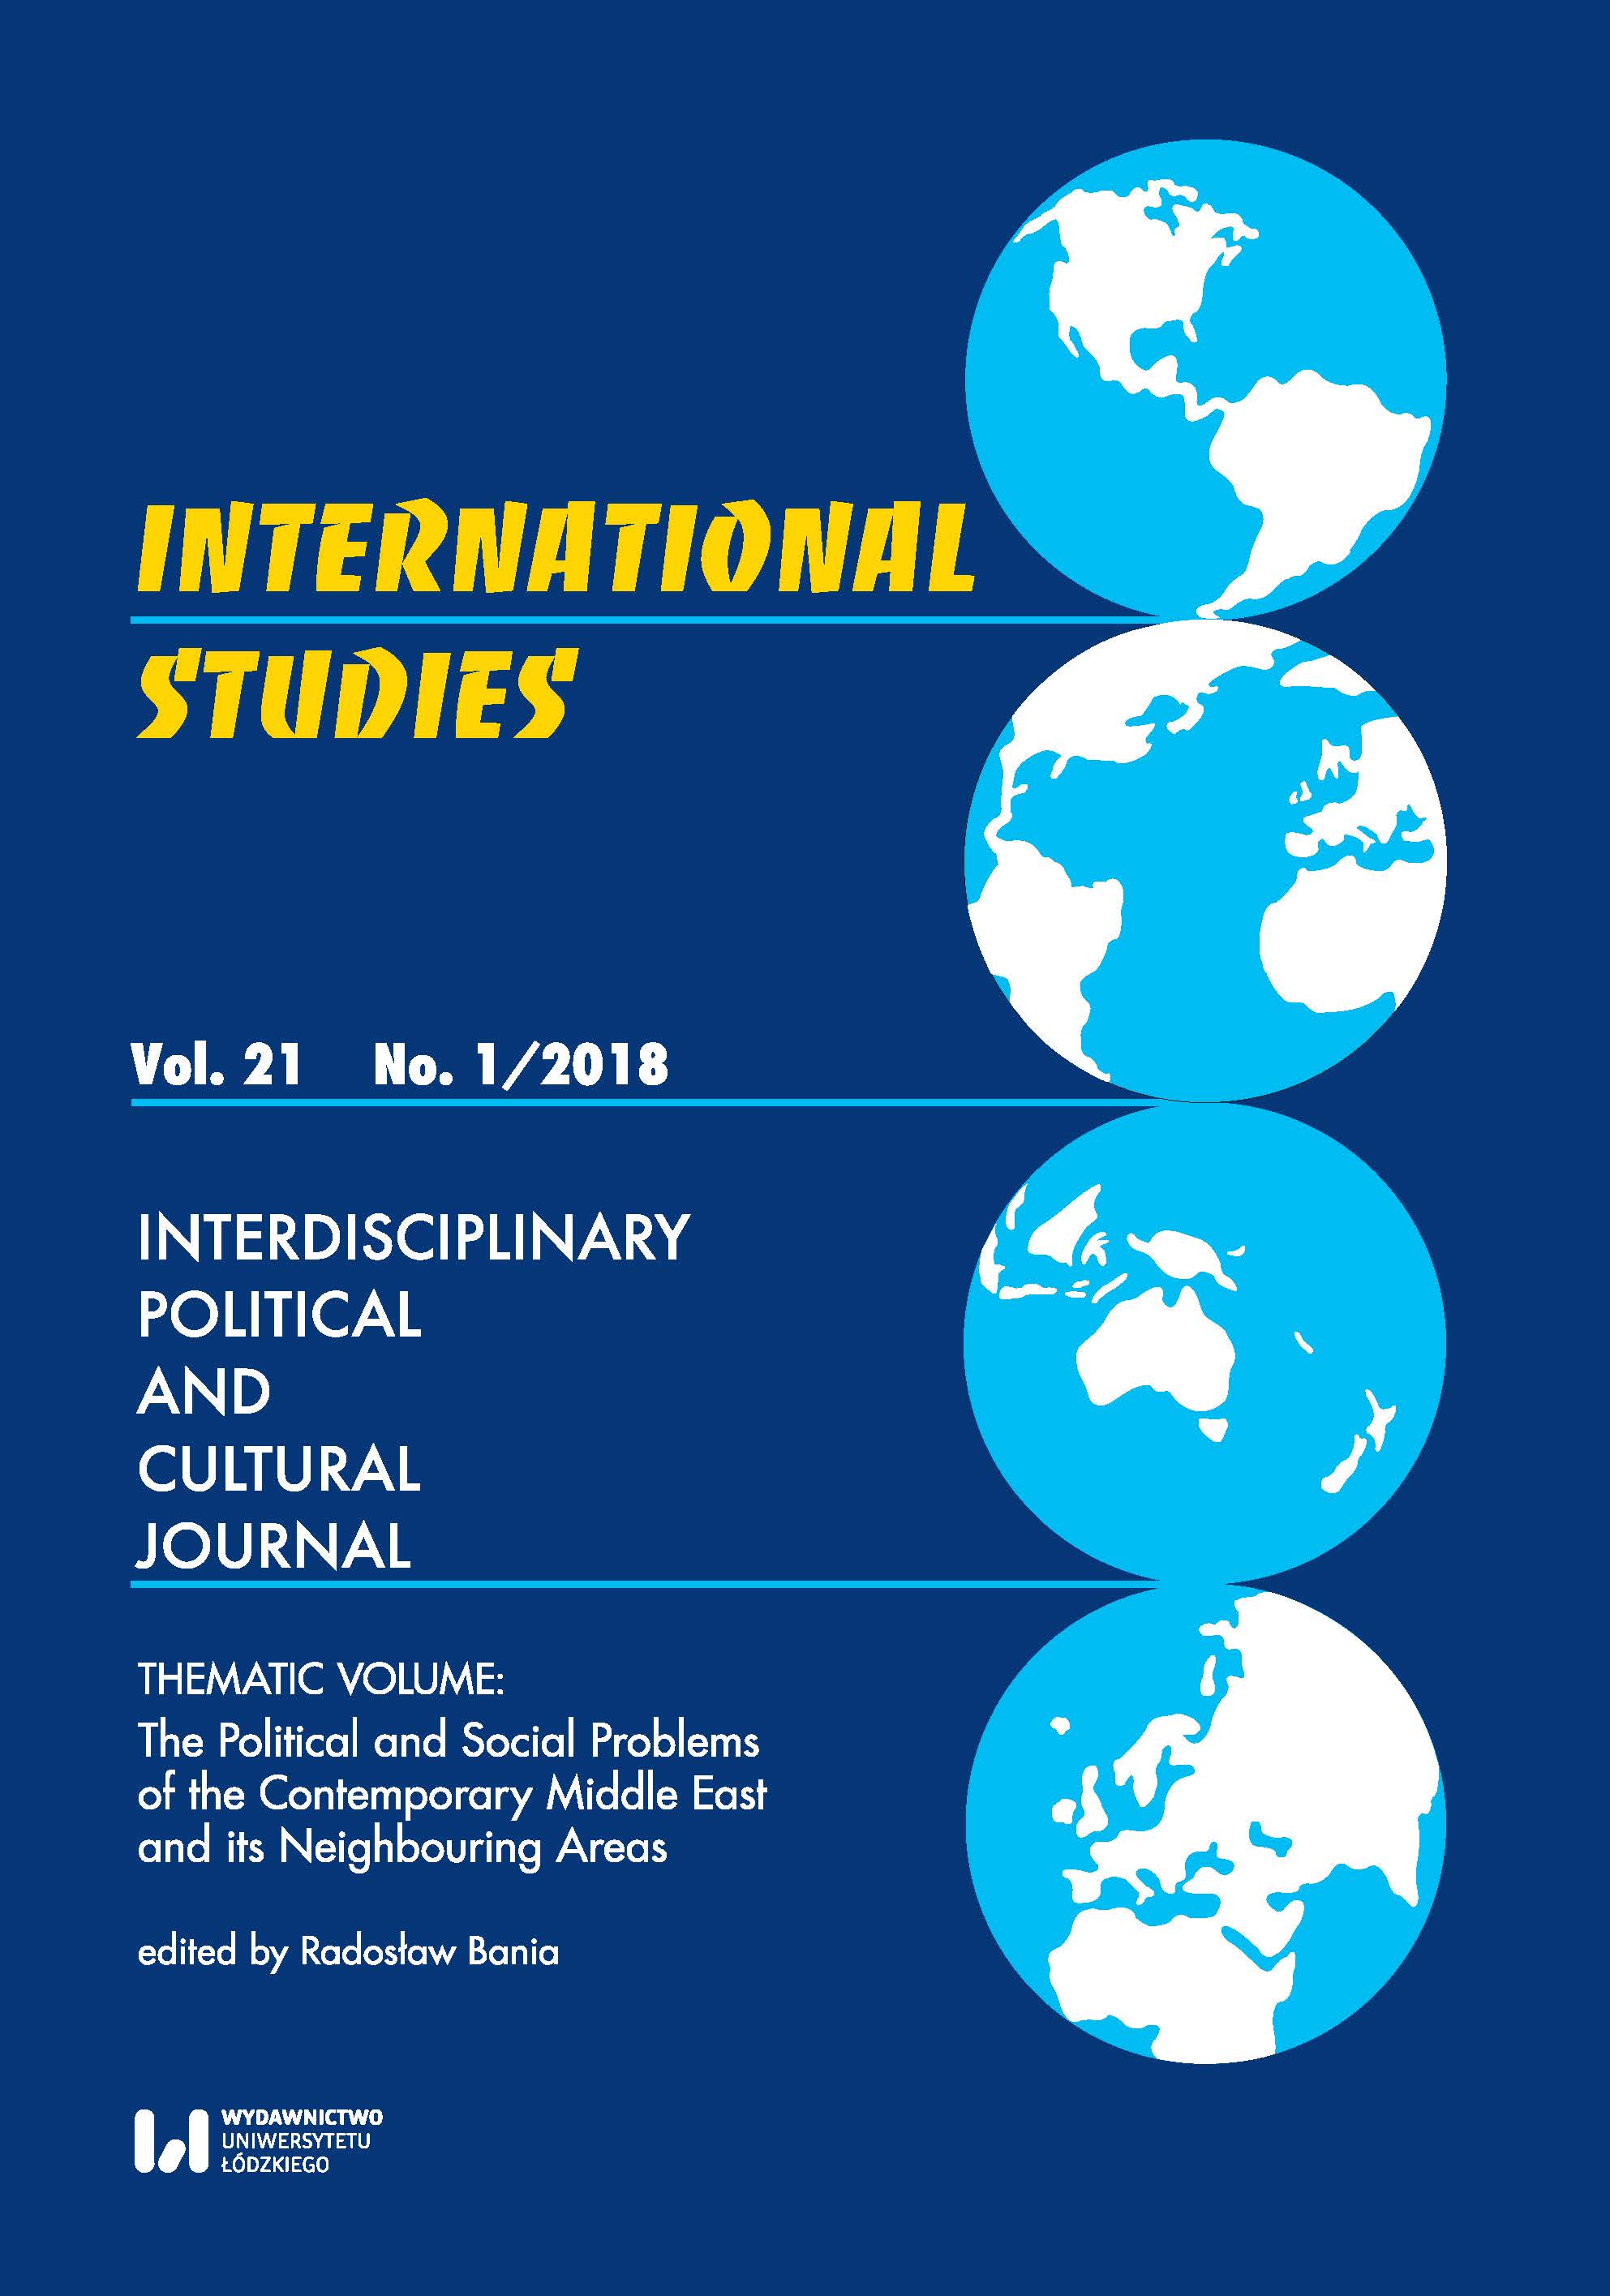 					View Vol. 21 No. 1 (2018): The Political and Social Problems of the Contemporary Middle East and its Neighbouring Areas
				